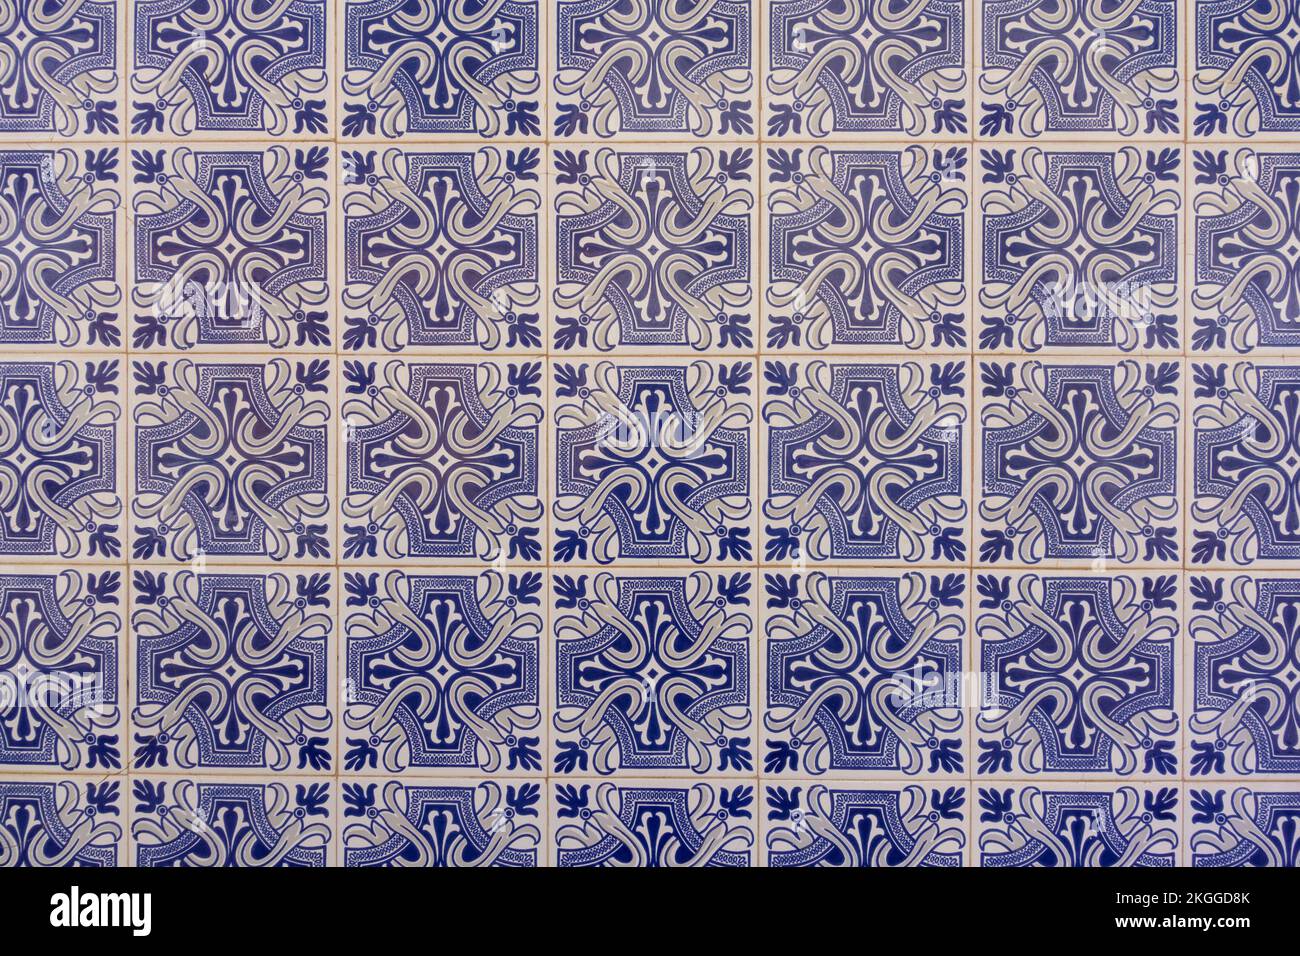 Typical Portuguese ceramic tiles on buildings and houses, Tavira, Algarve, Portugal Stock Photo